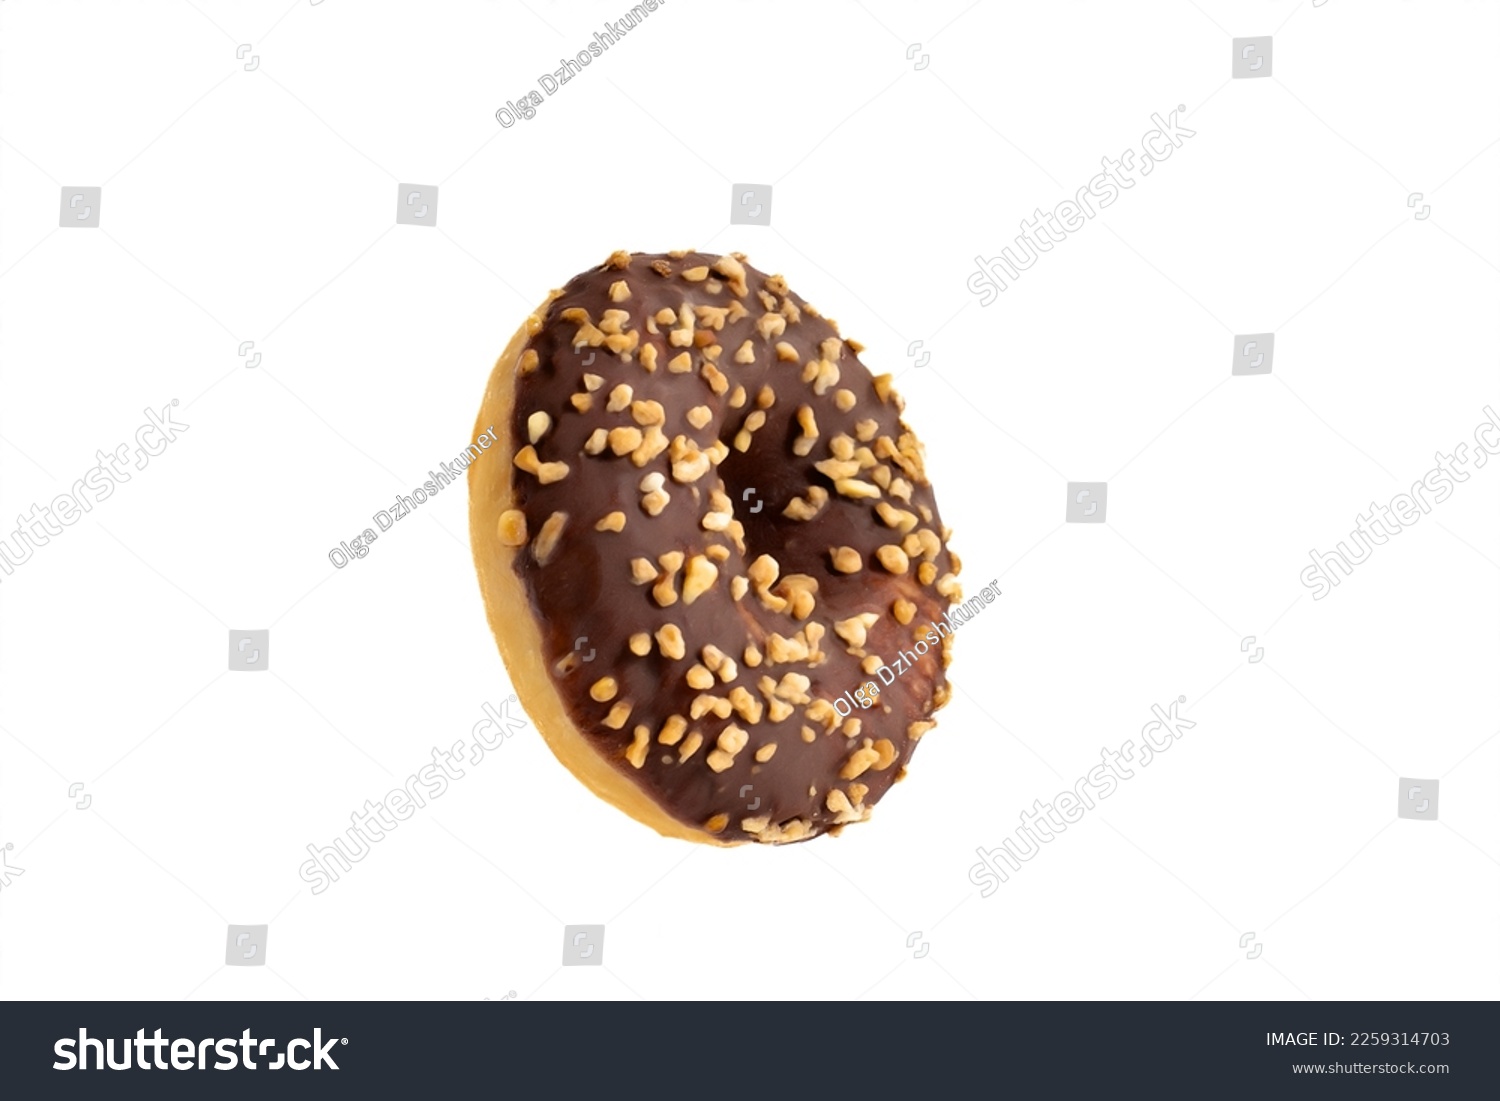 Tasty chocolate donut, isolated on white. High quality photo #2259314703